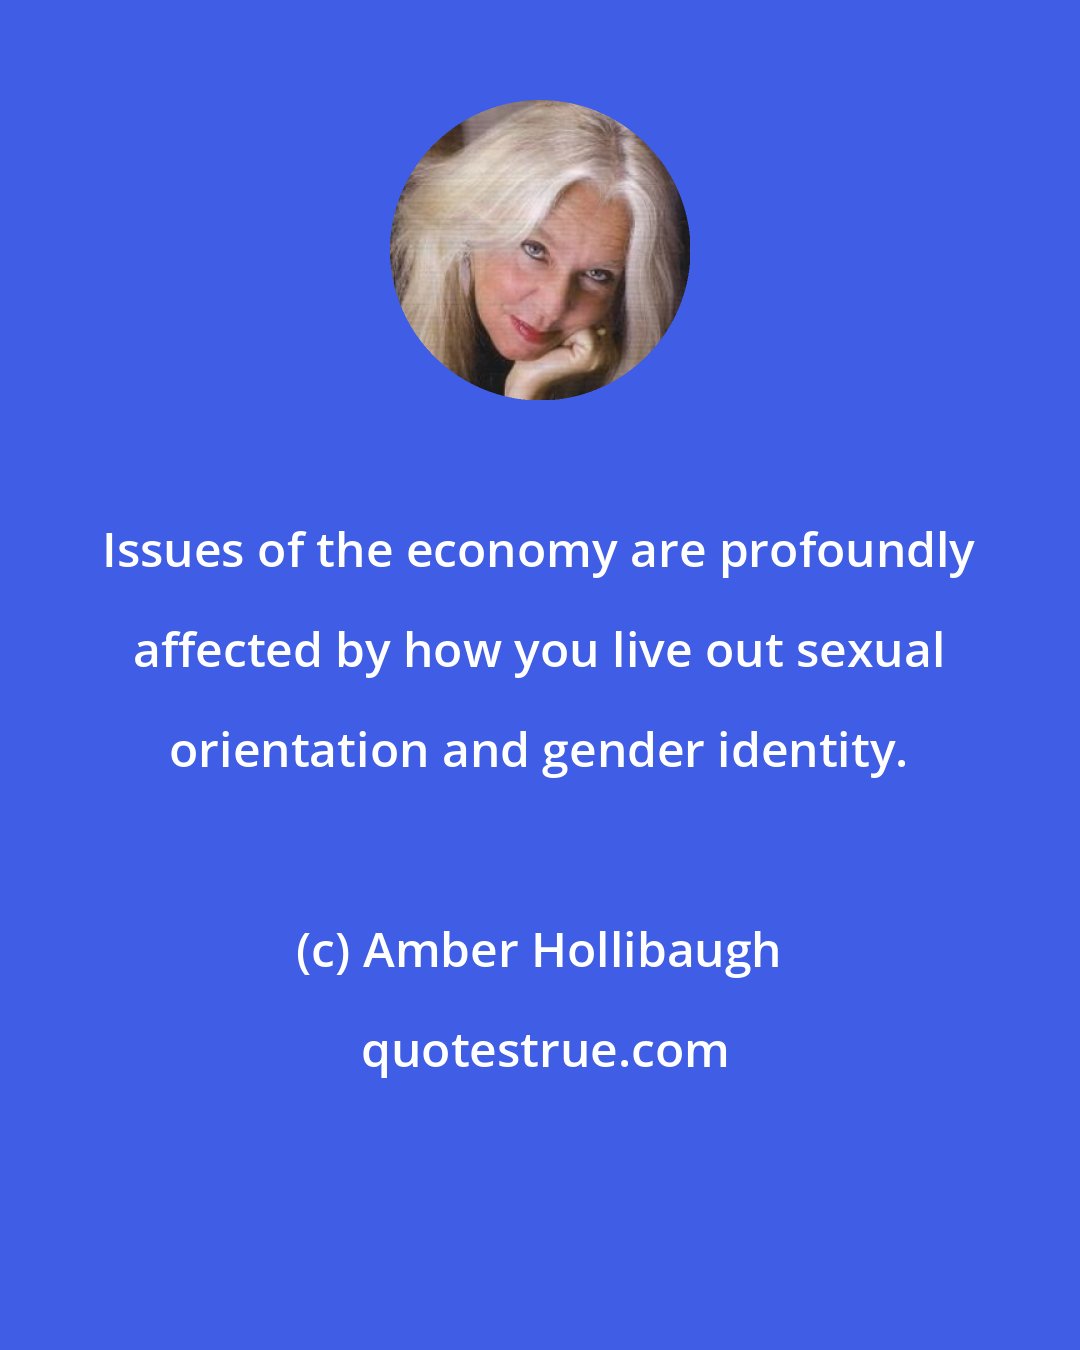 Amber Hollibaugh: Issues of the economy are profoundly affected by how you live out sexual orientation and gender identity.